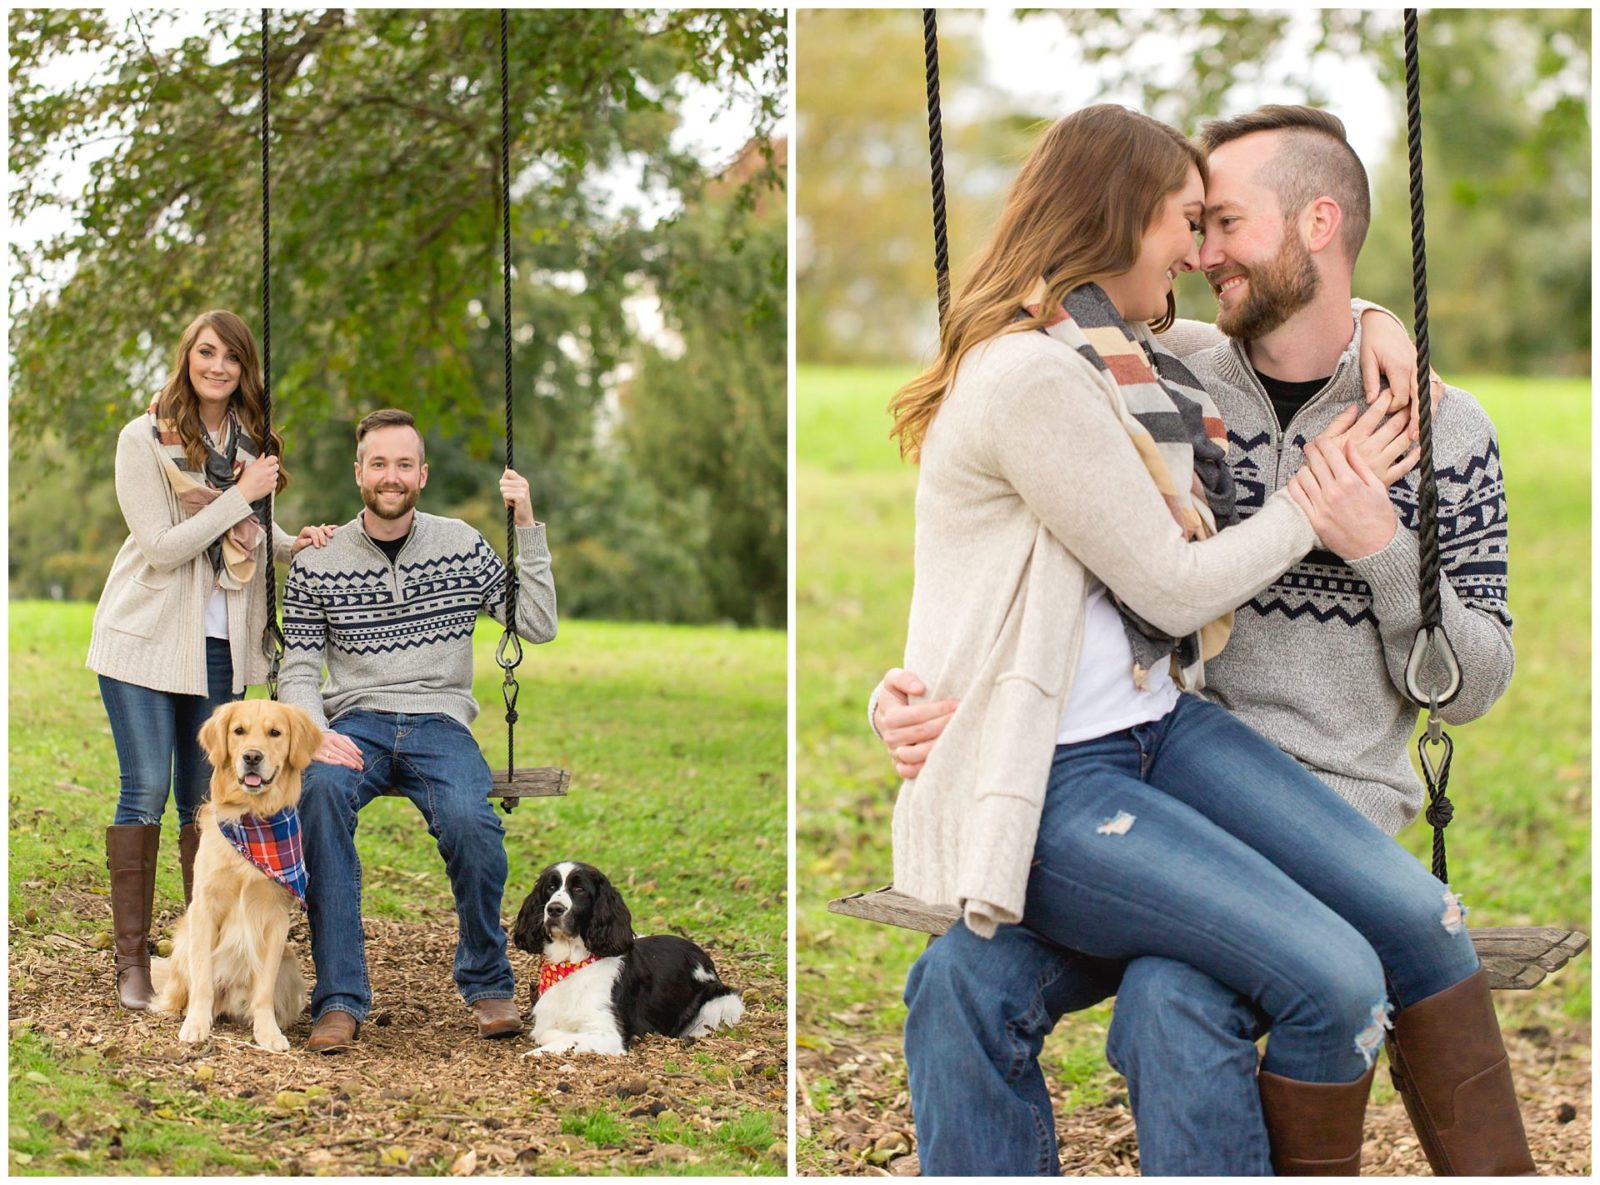 Fall outdoor engagement session with a swing and dogs at Shaker Village in Harrodsburg, Kentucky.